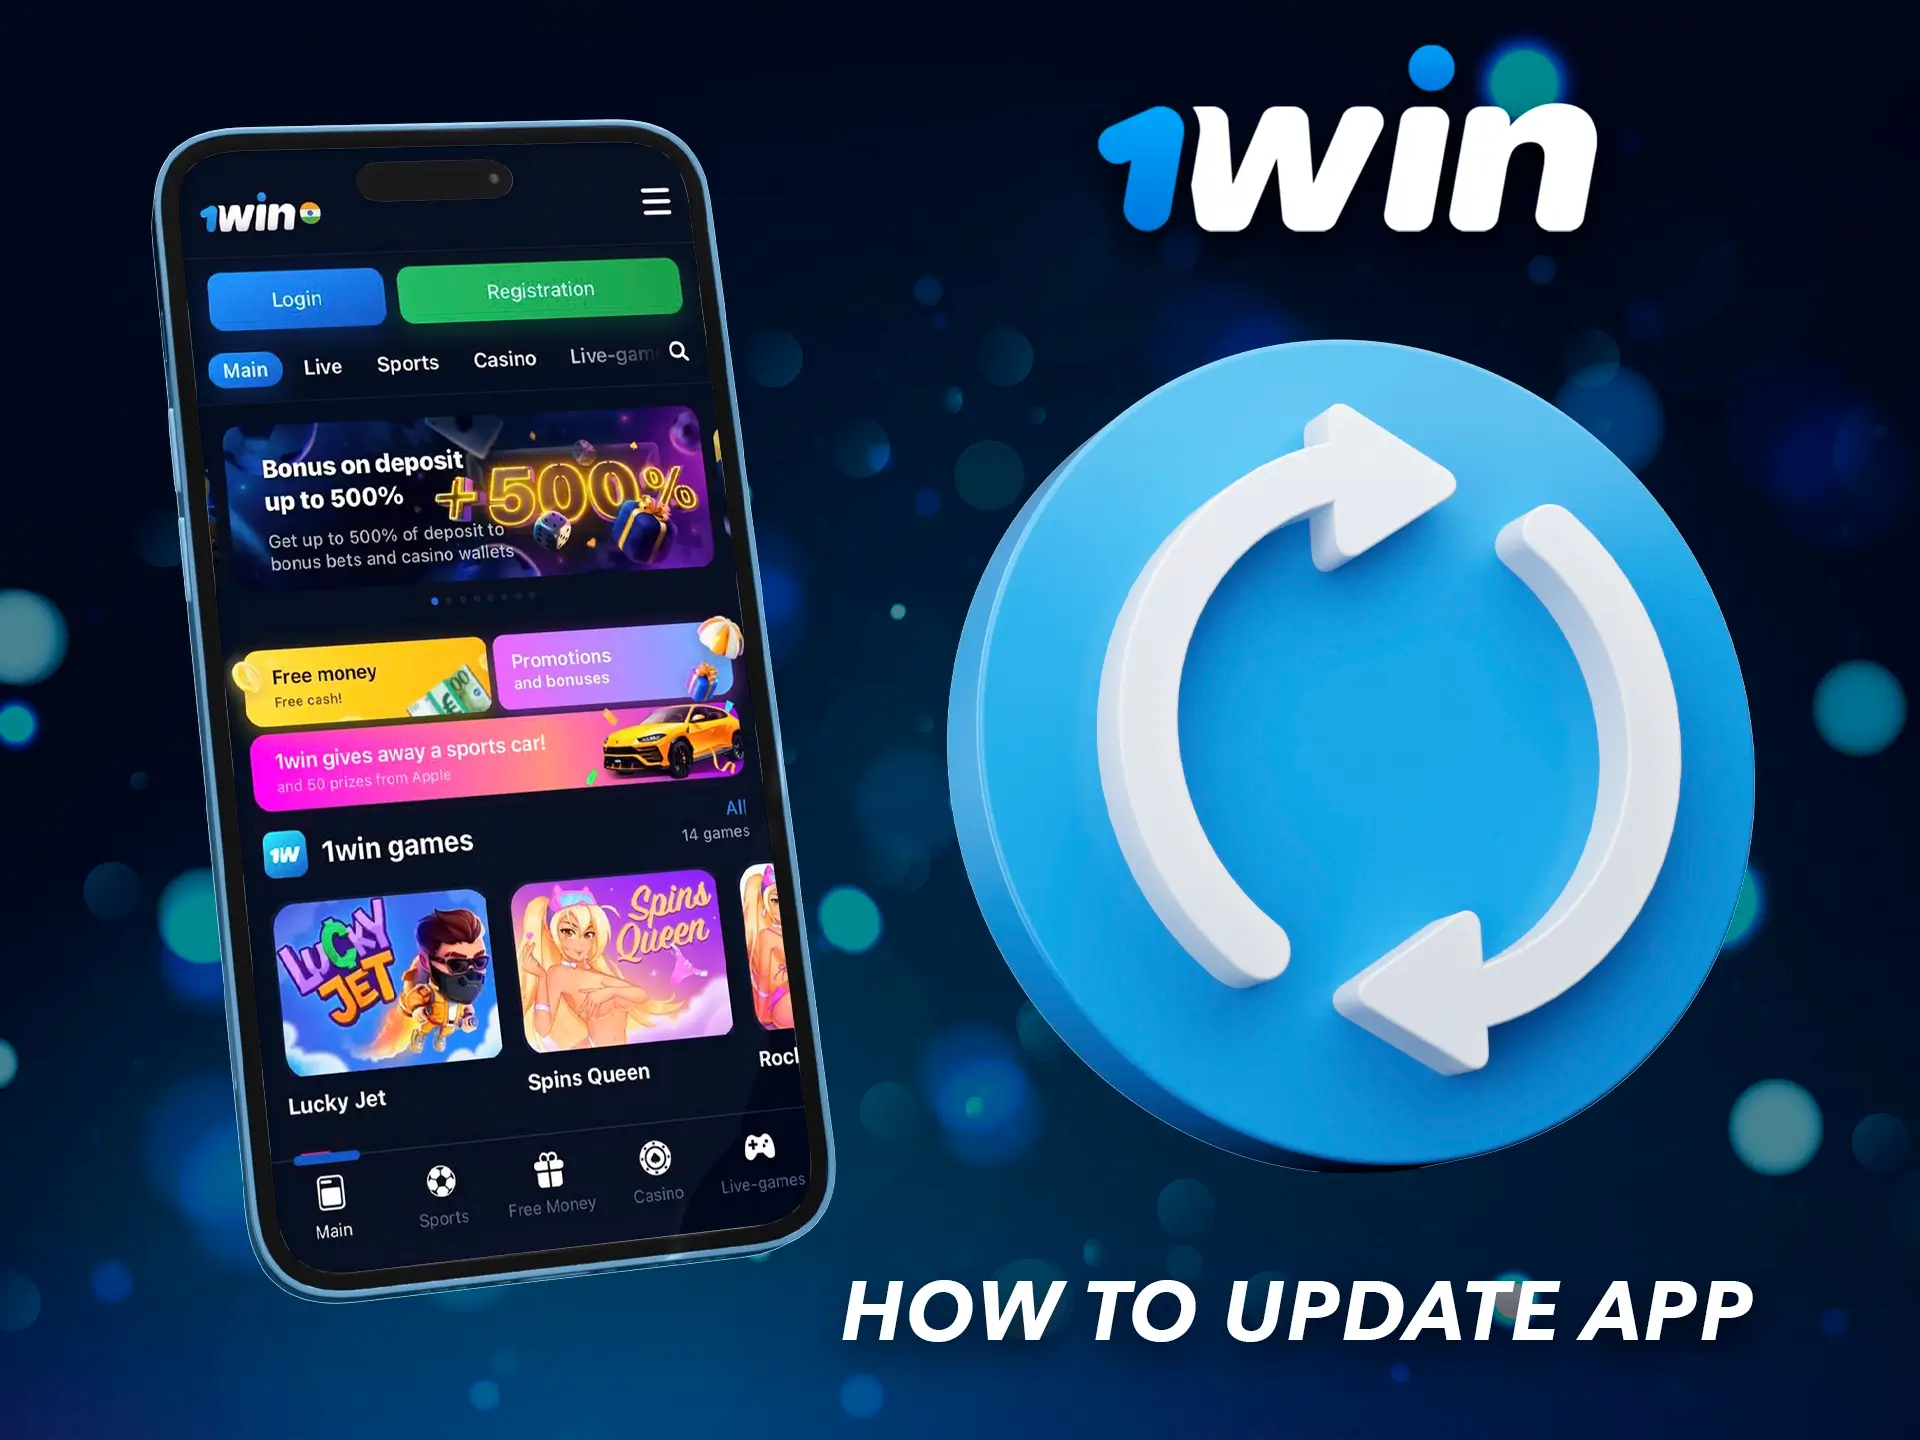 If you notice any issues, simply update the 1Win app.